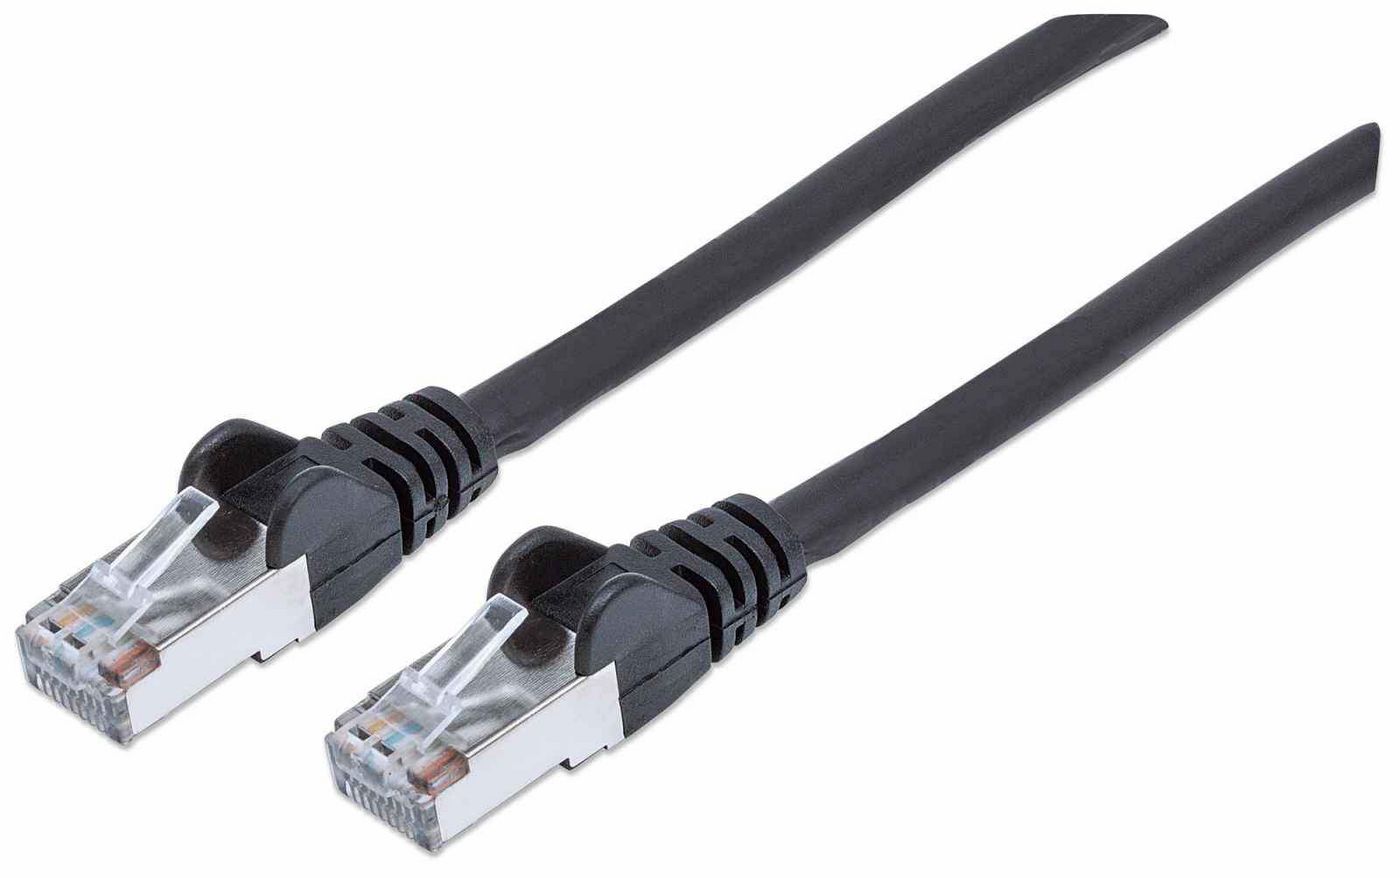 Intellinet 740814 High Performance Network Cable 